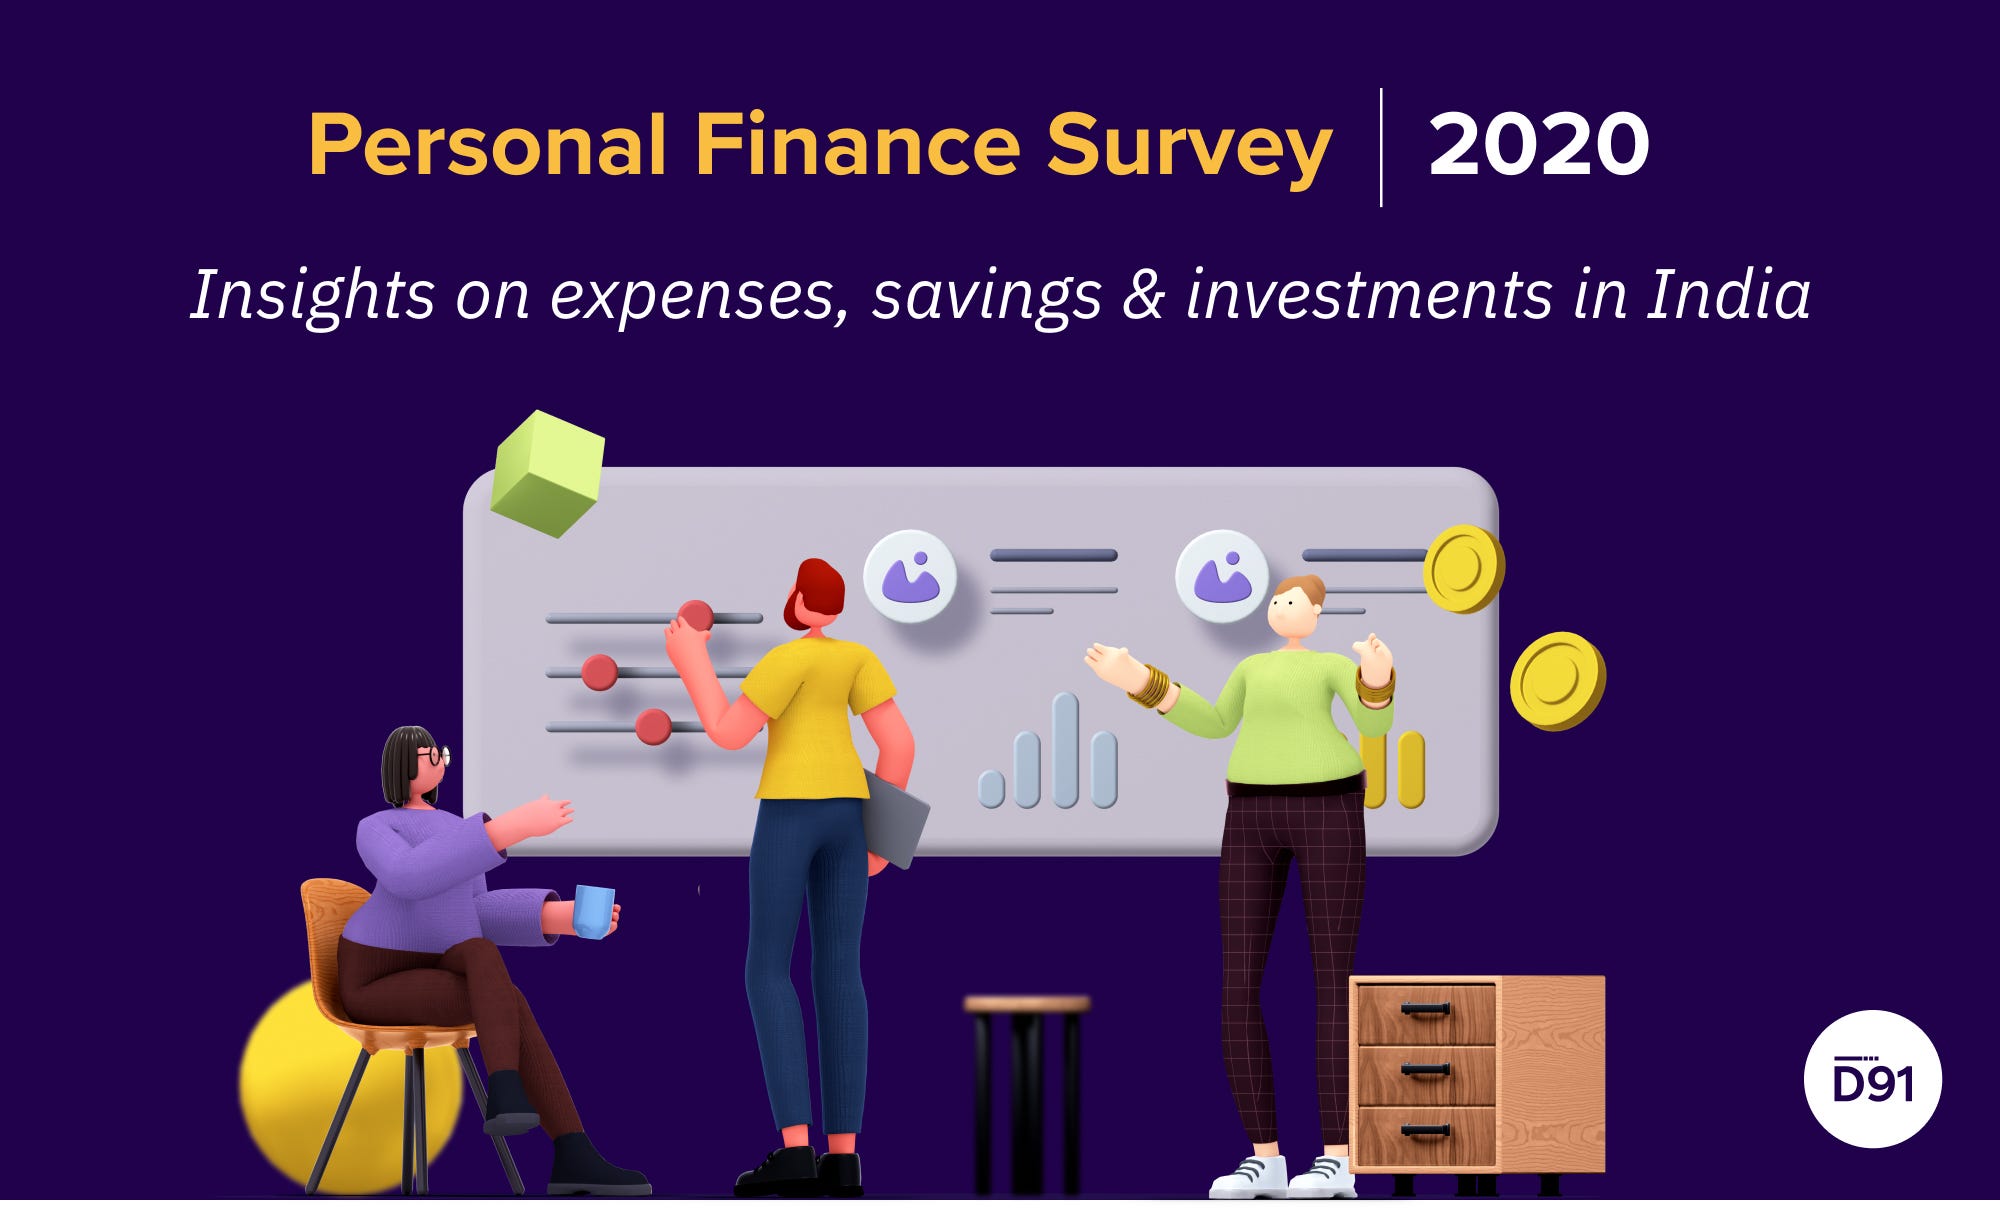 Personal Finance Survey 2020Expenses, Savings & Investments by D91